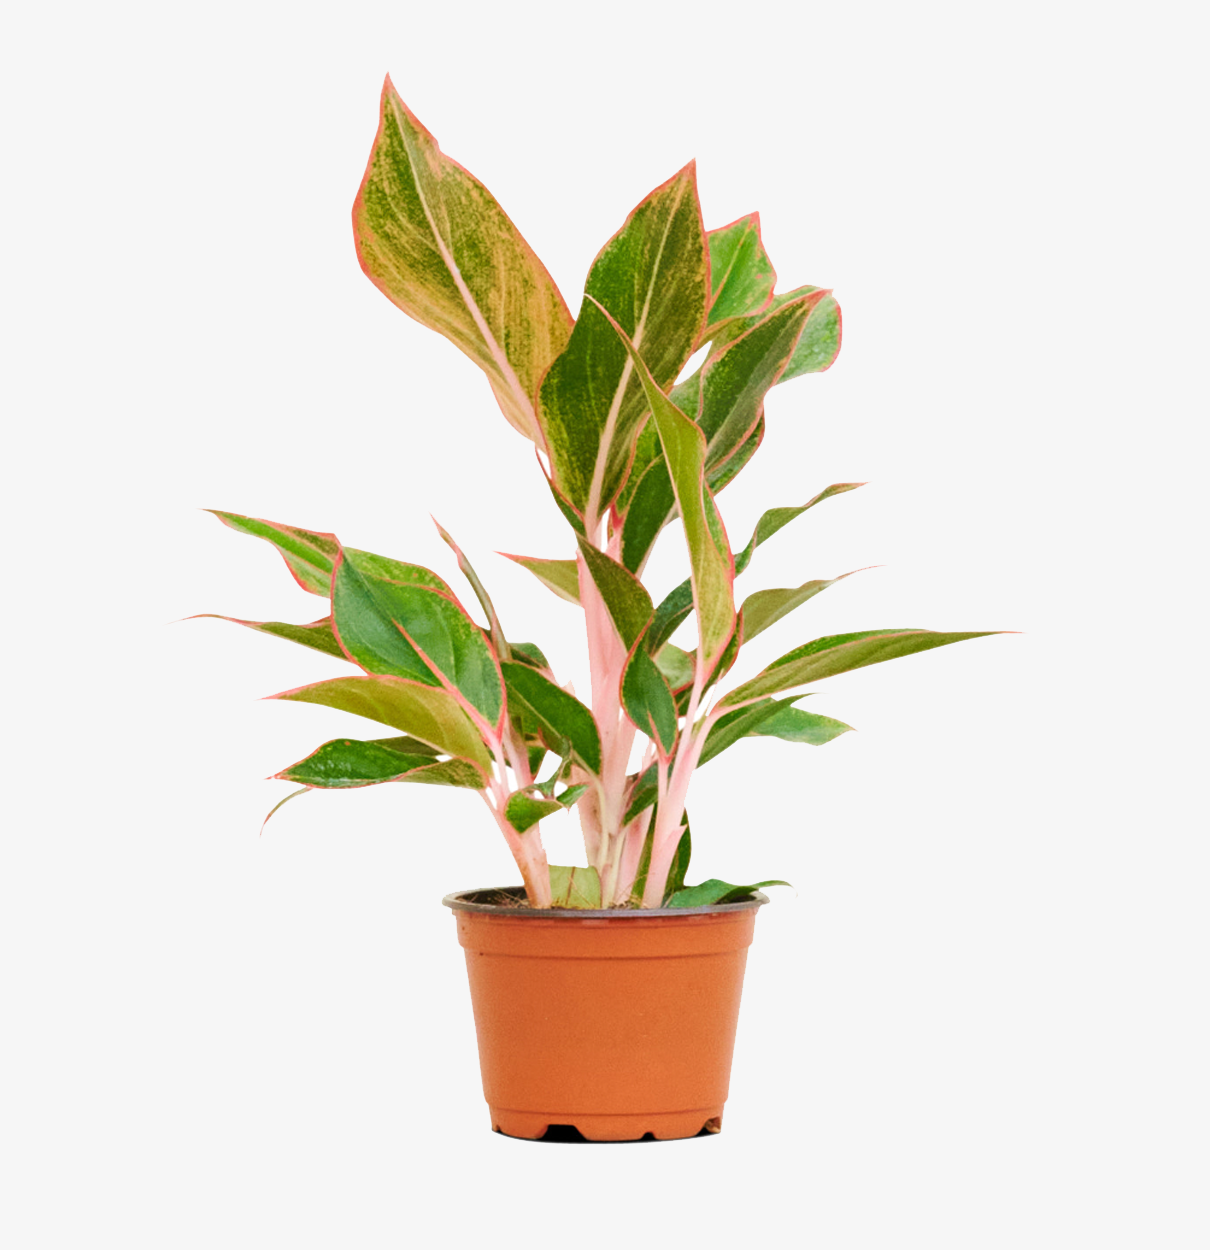 Red Chinese Evergreen